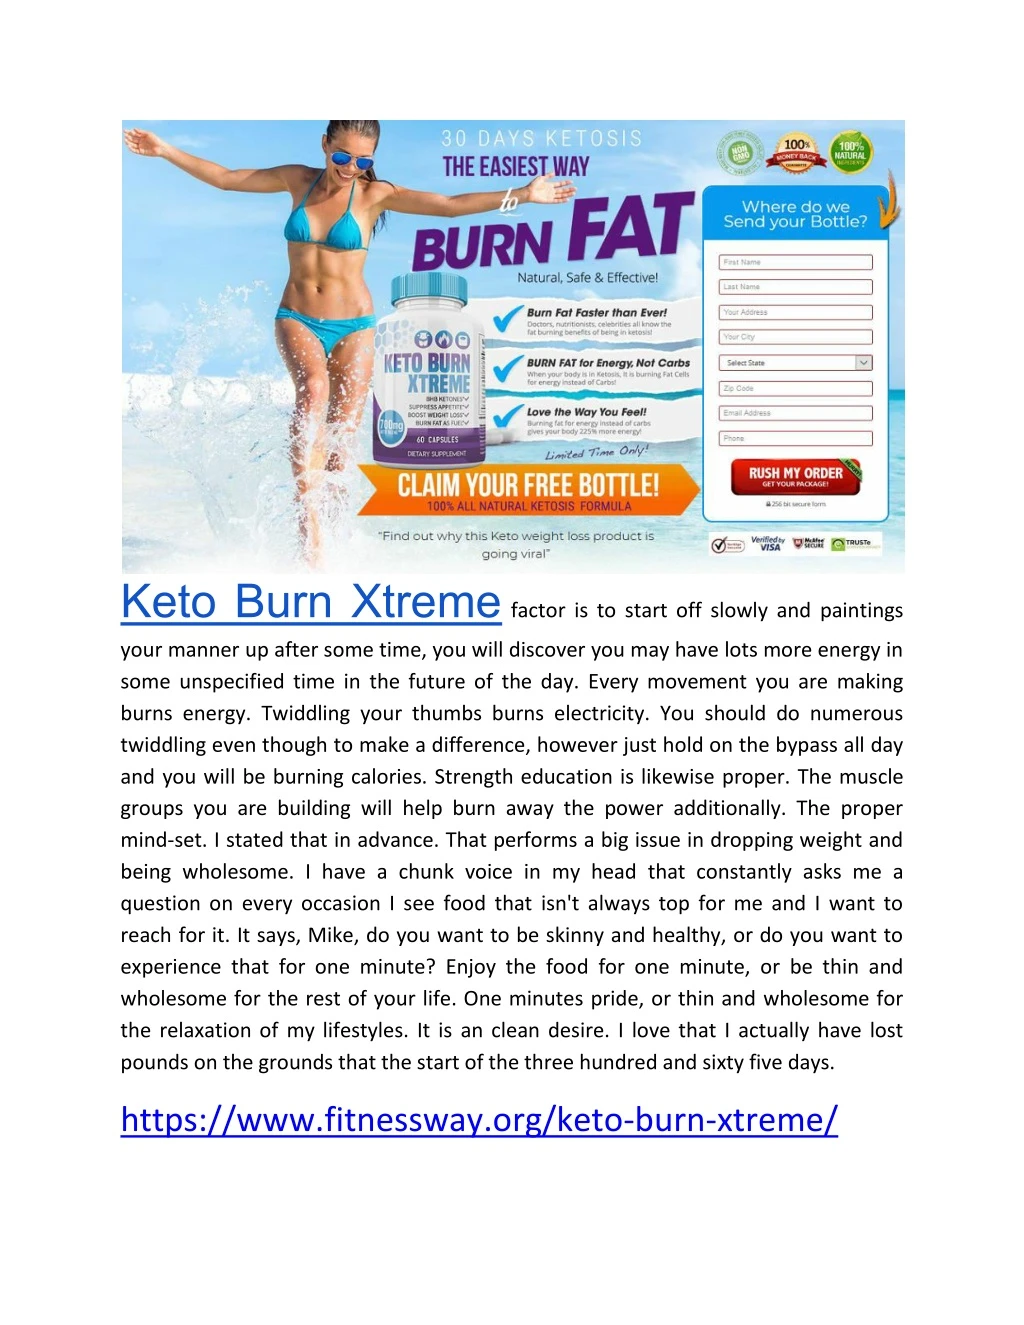 keto burn xtreme factor is to start off slowly